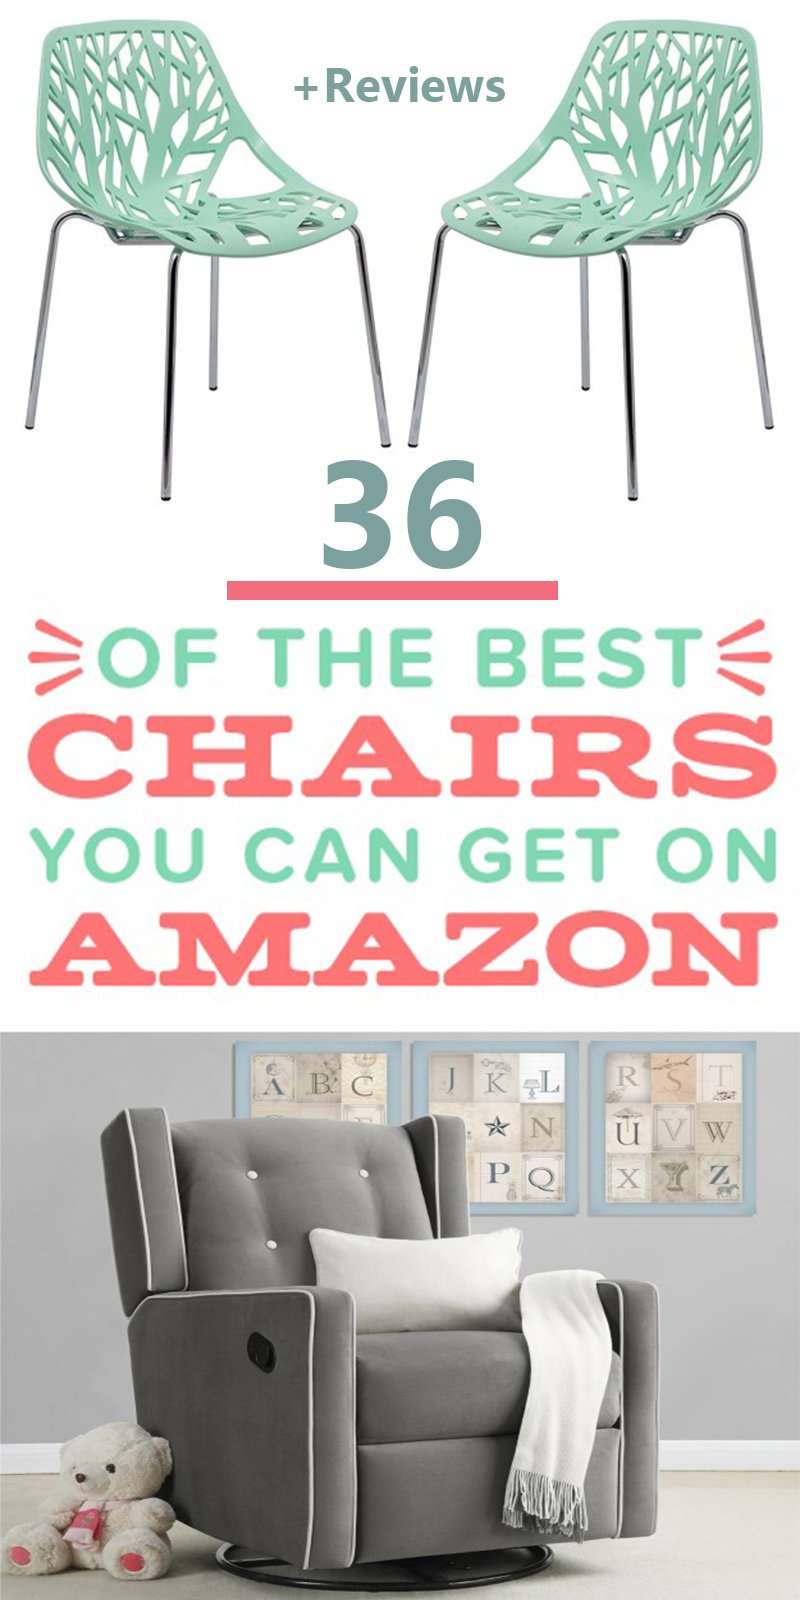 36 OF THE BEST CHAIRS YOU CAN GET ON AMAZON + REVIEWS